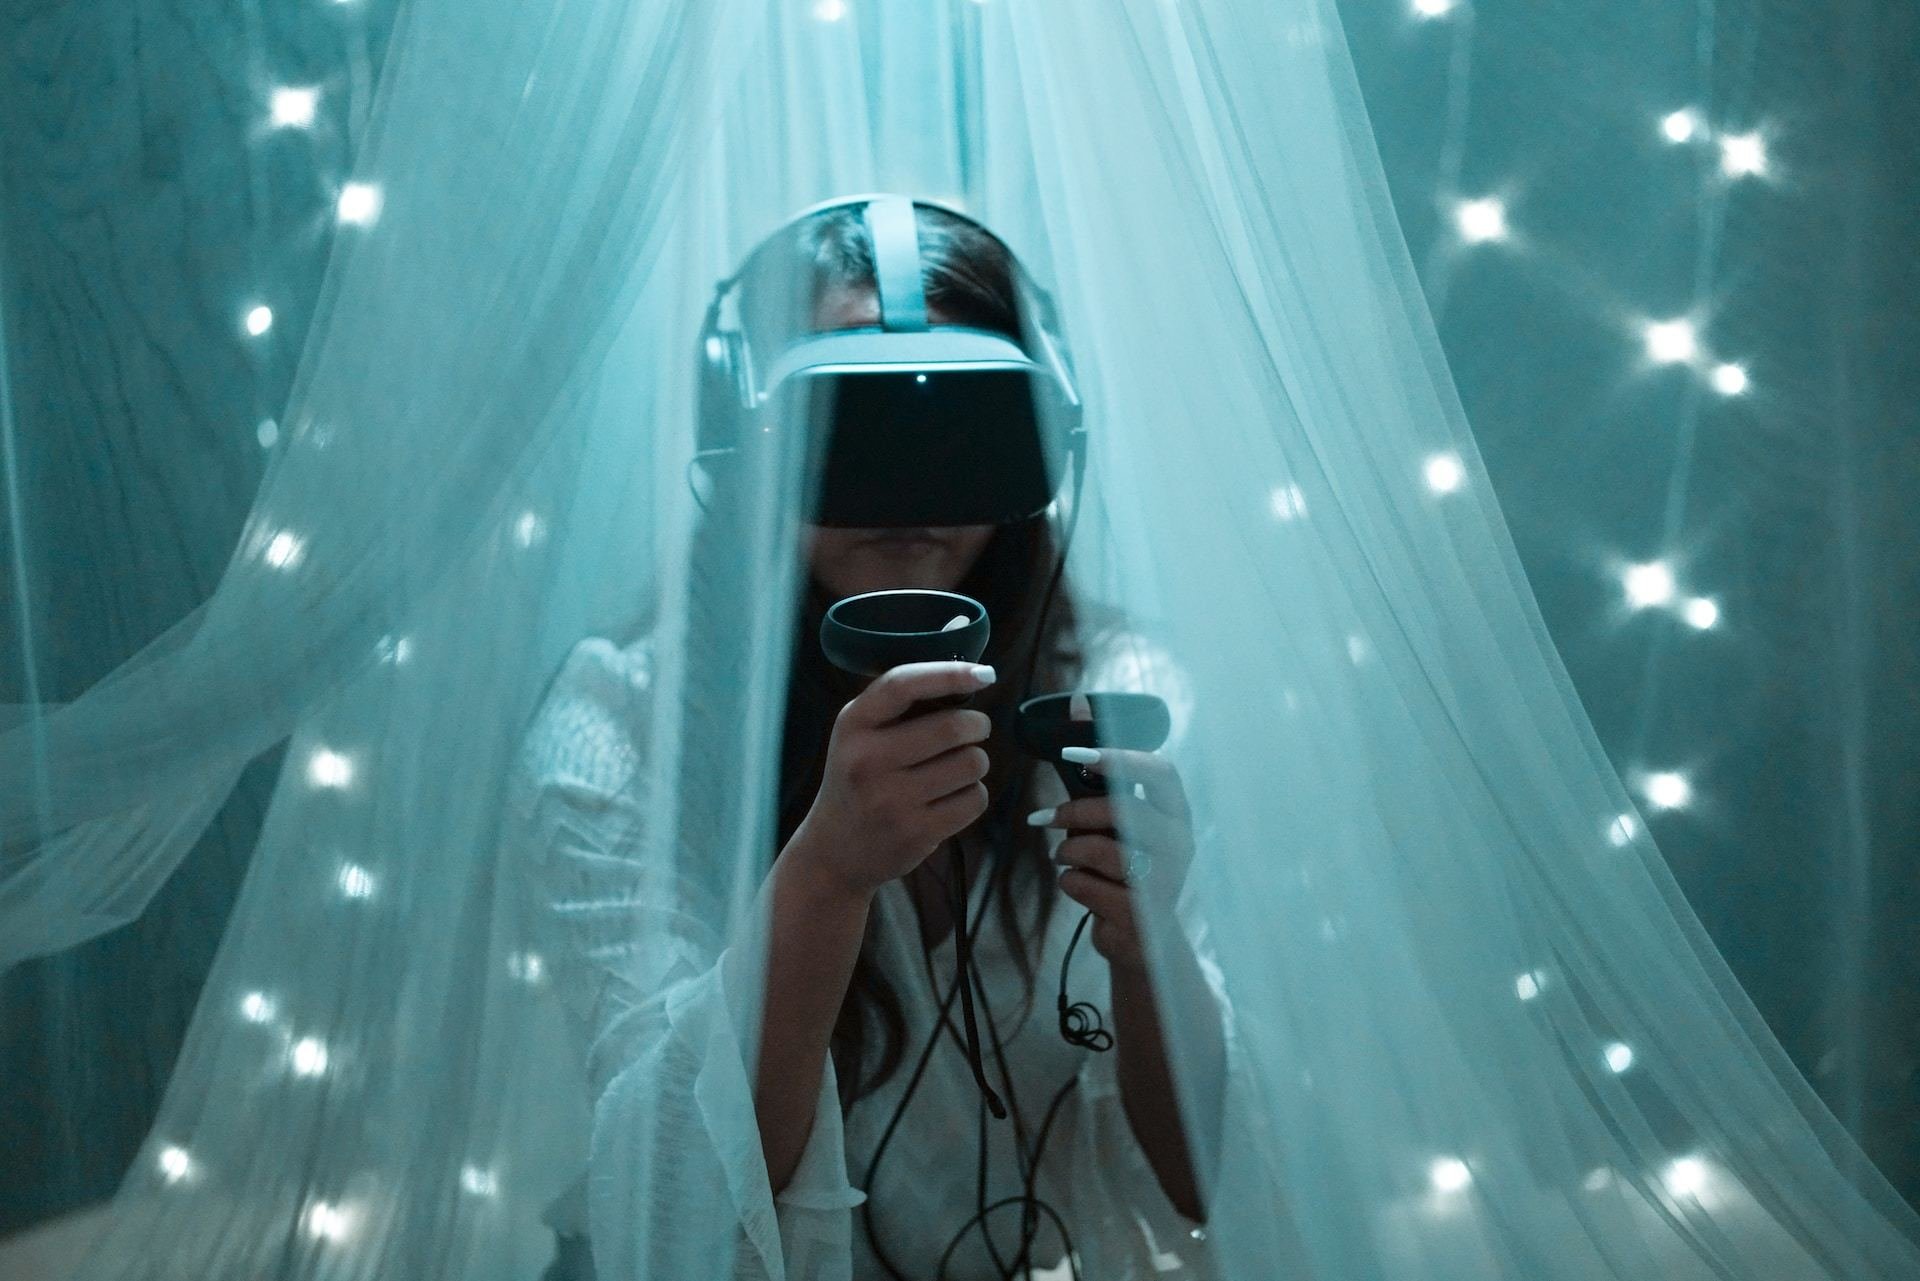 image of a person with a virtual reality headset